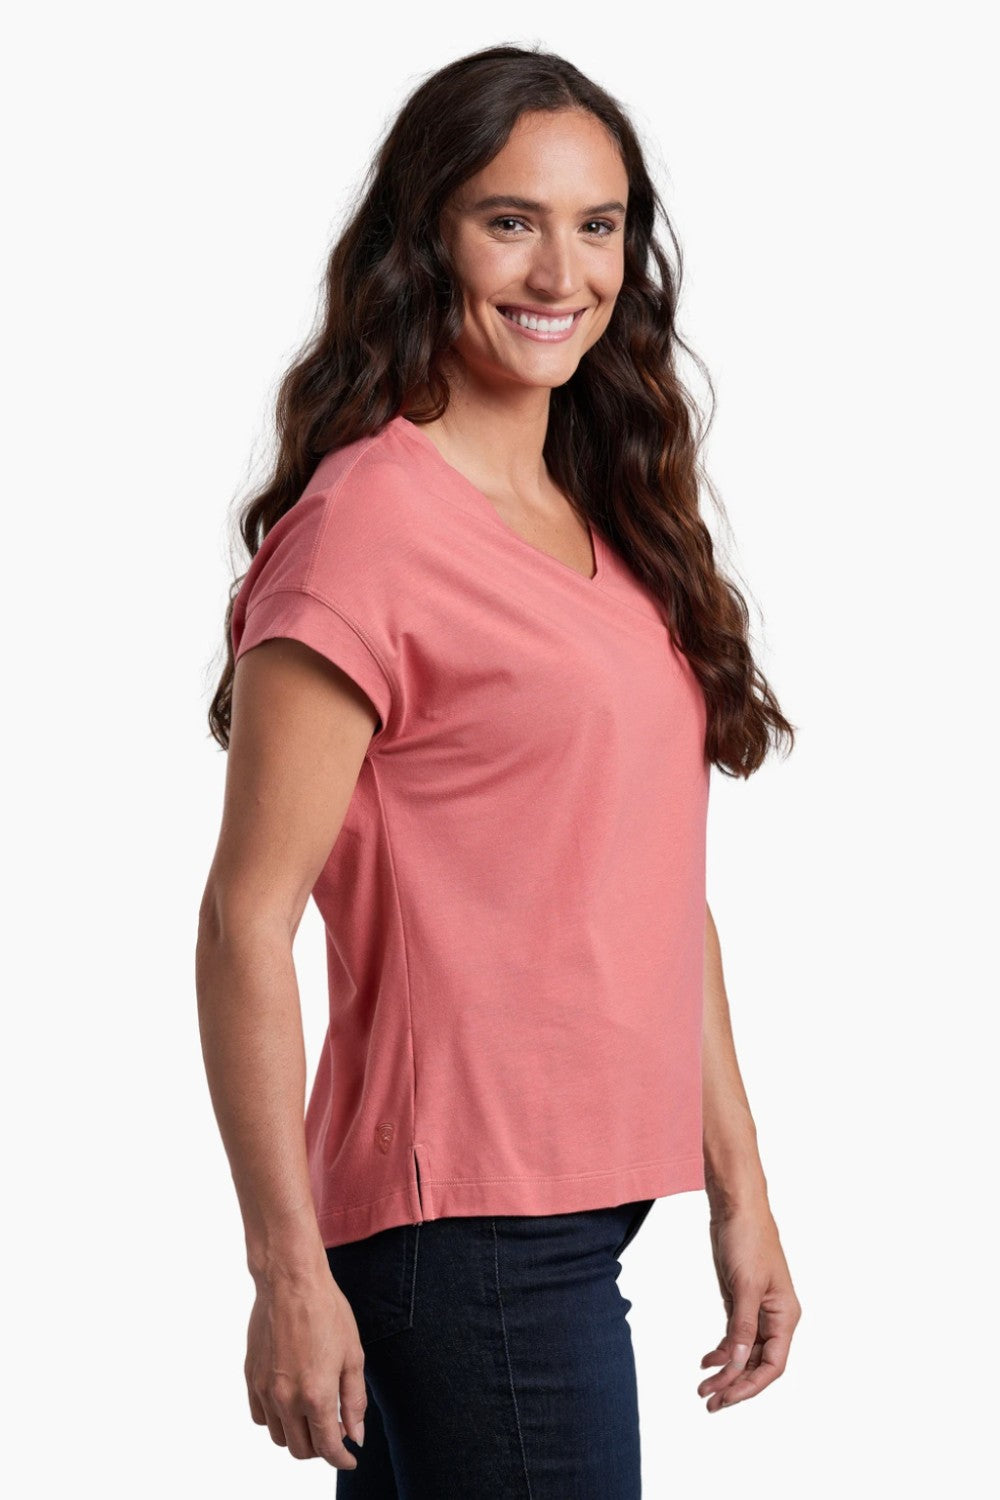 Buttery soft and highly breathable, the SUPRIMA™ Short Sleeve bridges the gap between everyday comfort and active performance. With a boxy modern fit, classic V-neck, and tapered sleeve, this versatile top delivers soft, breathable comfort with maximum sun (UPF 50+) protection and an elevated design.